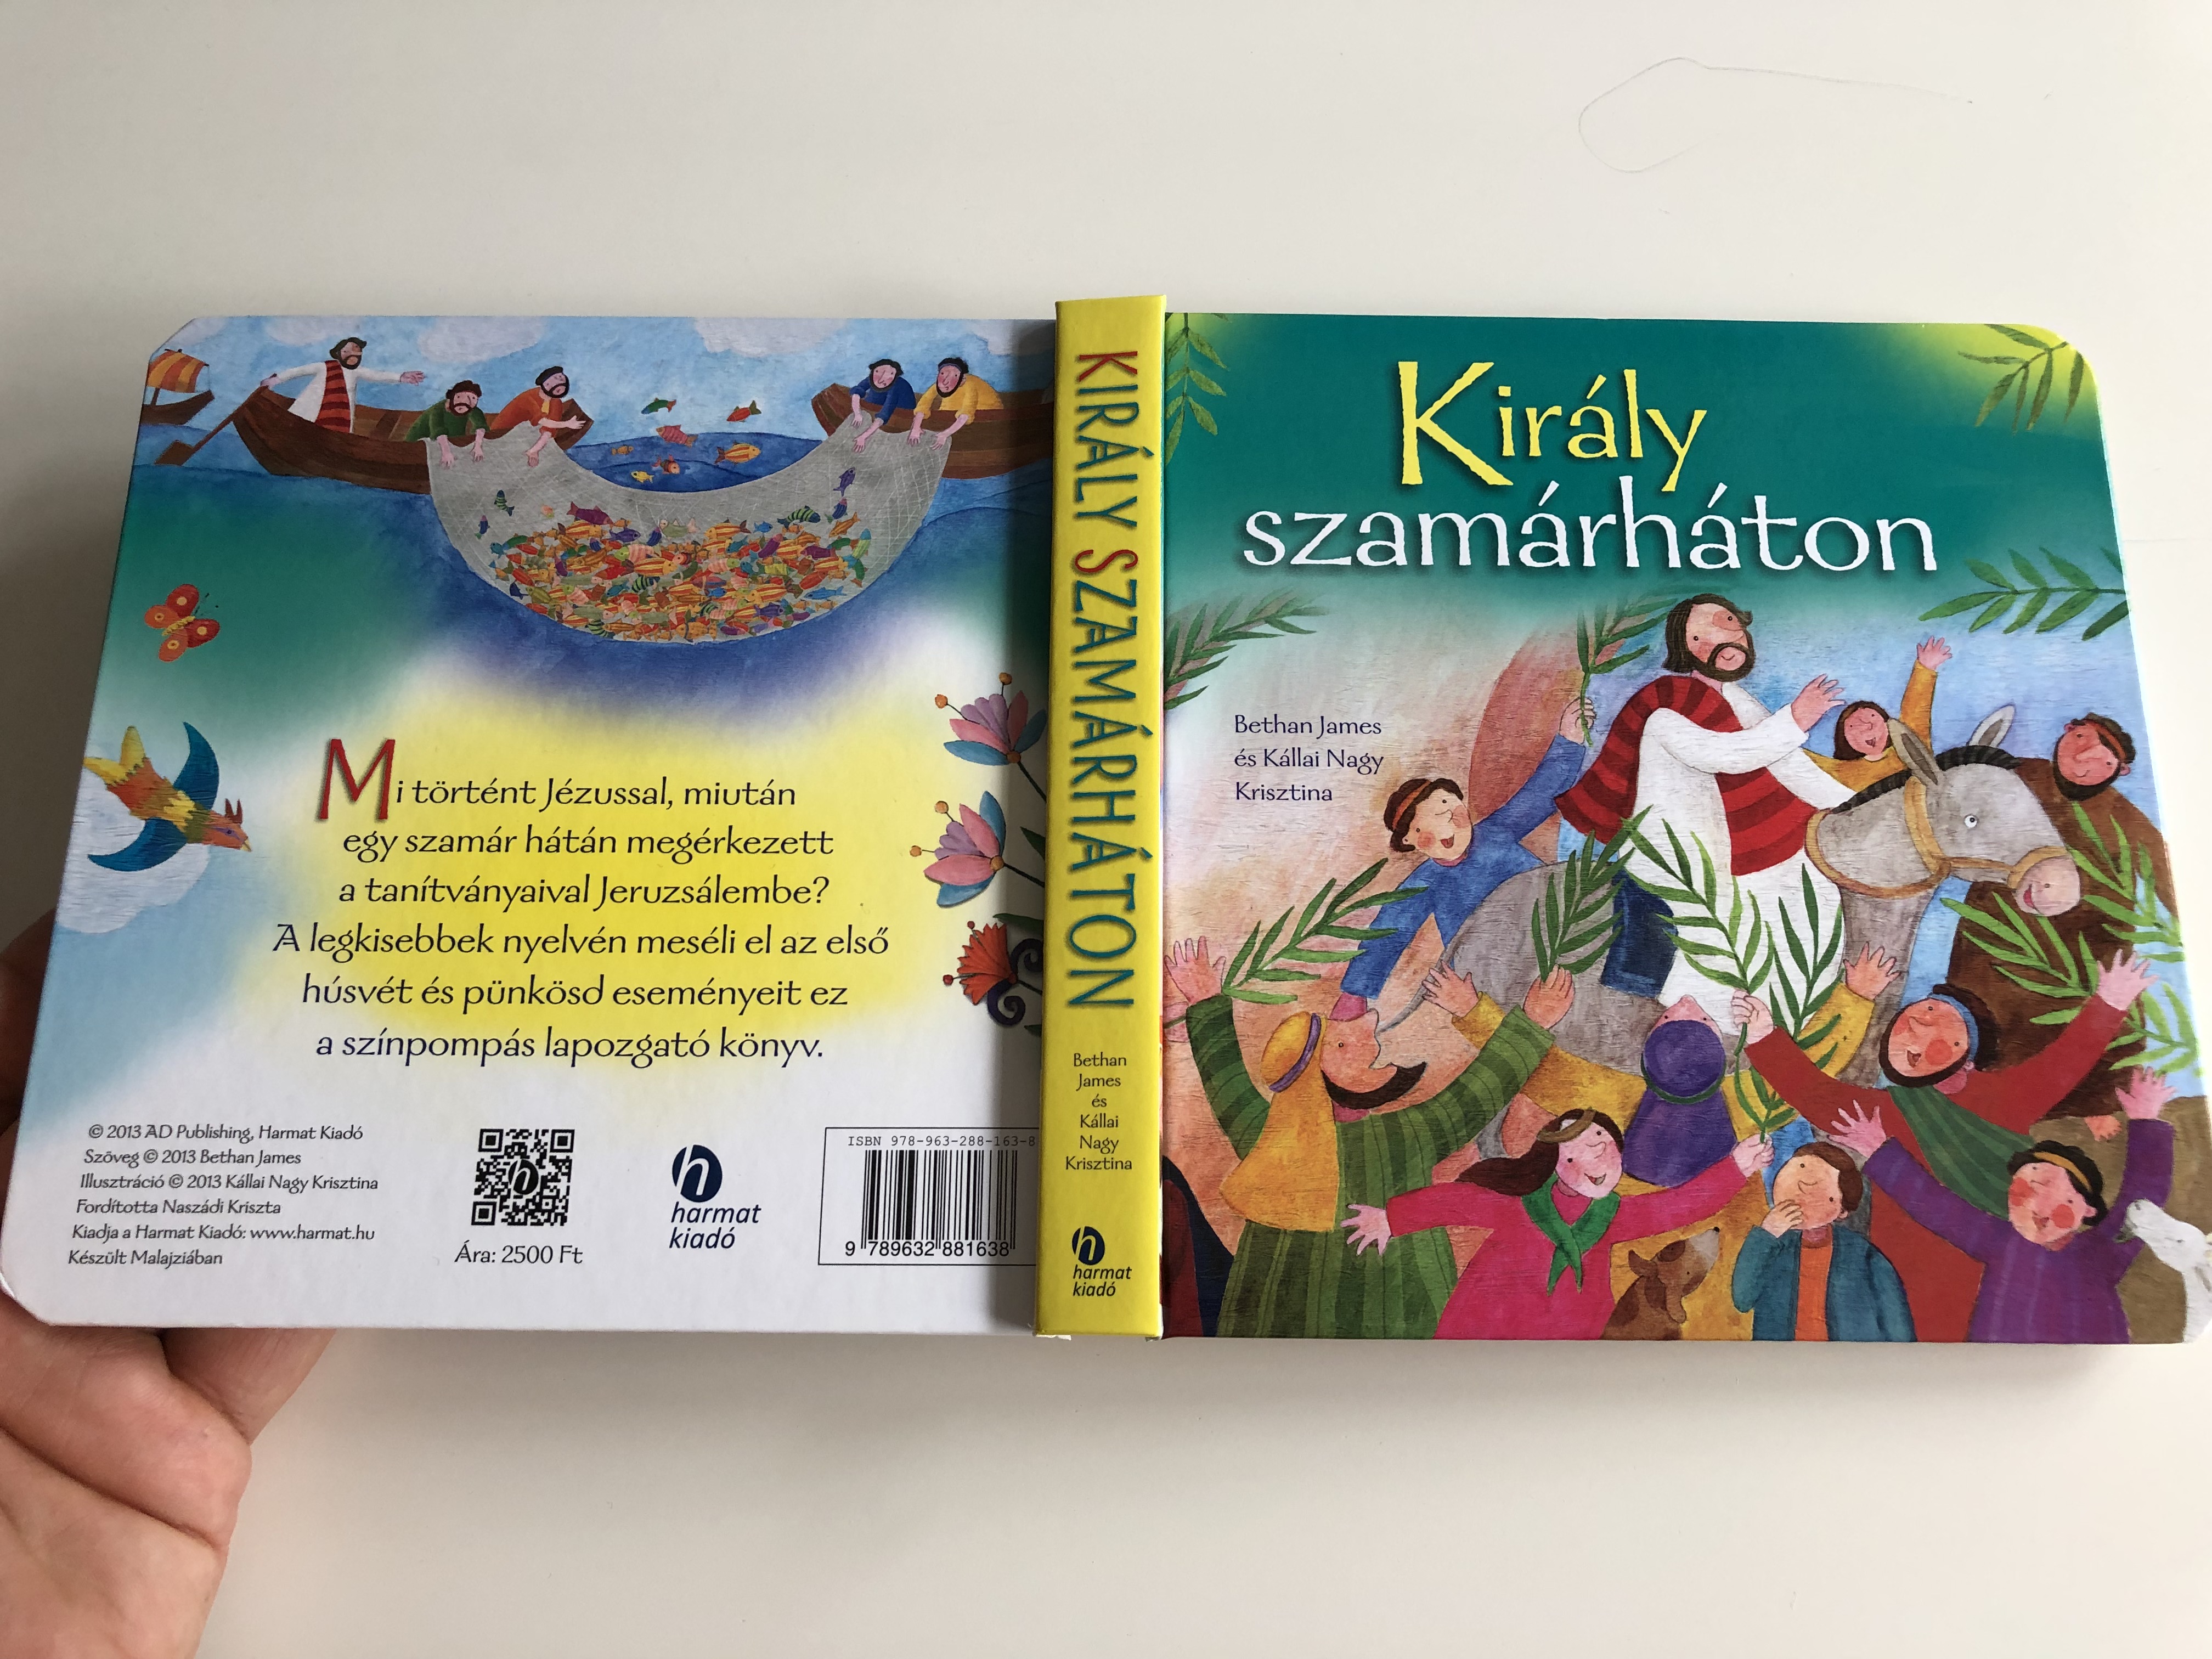 kir-ly-szam-rh-ton-by-bethan-james-k-llai-nagy-krisztina-hungarian-translation-of-the-miracle-of-easter-easter-mini-book-this-vibrant-retelling-of-the-easter-story-covers-biblical-events-from-palm-sunday-through-to-after-je-7274620-.jpg